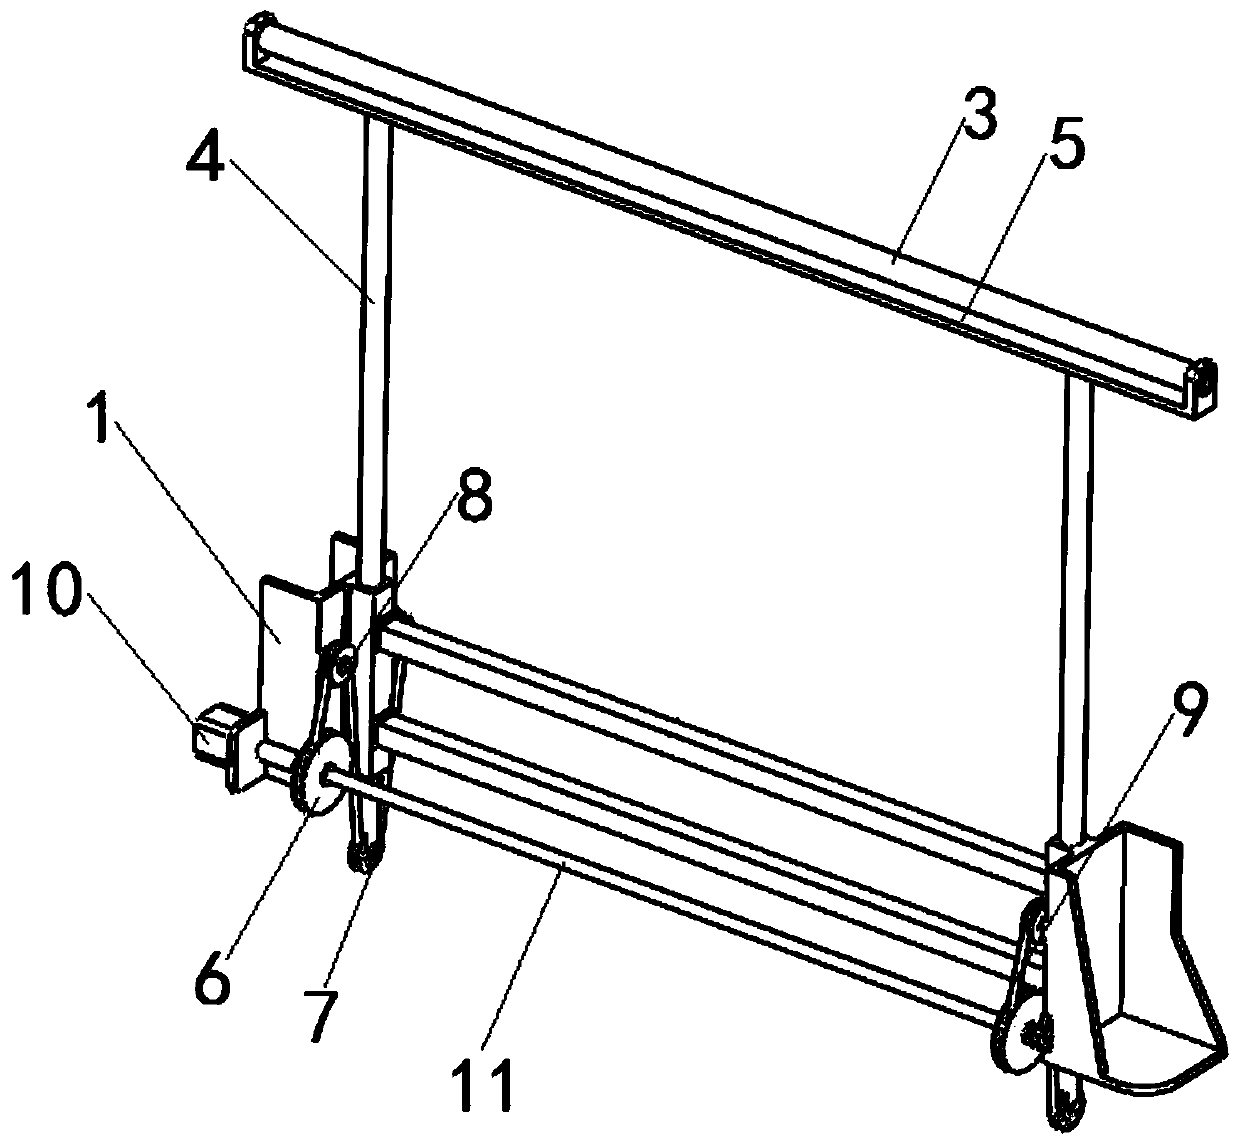 Bridge wind barrier device with adjustable height and porosity